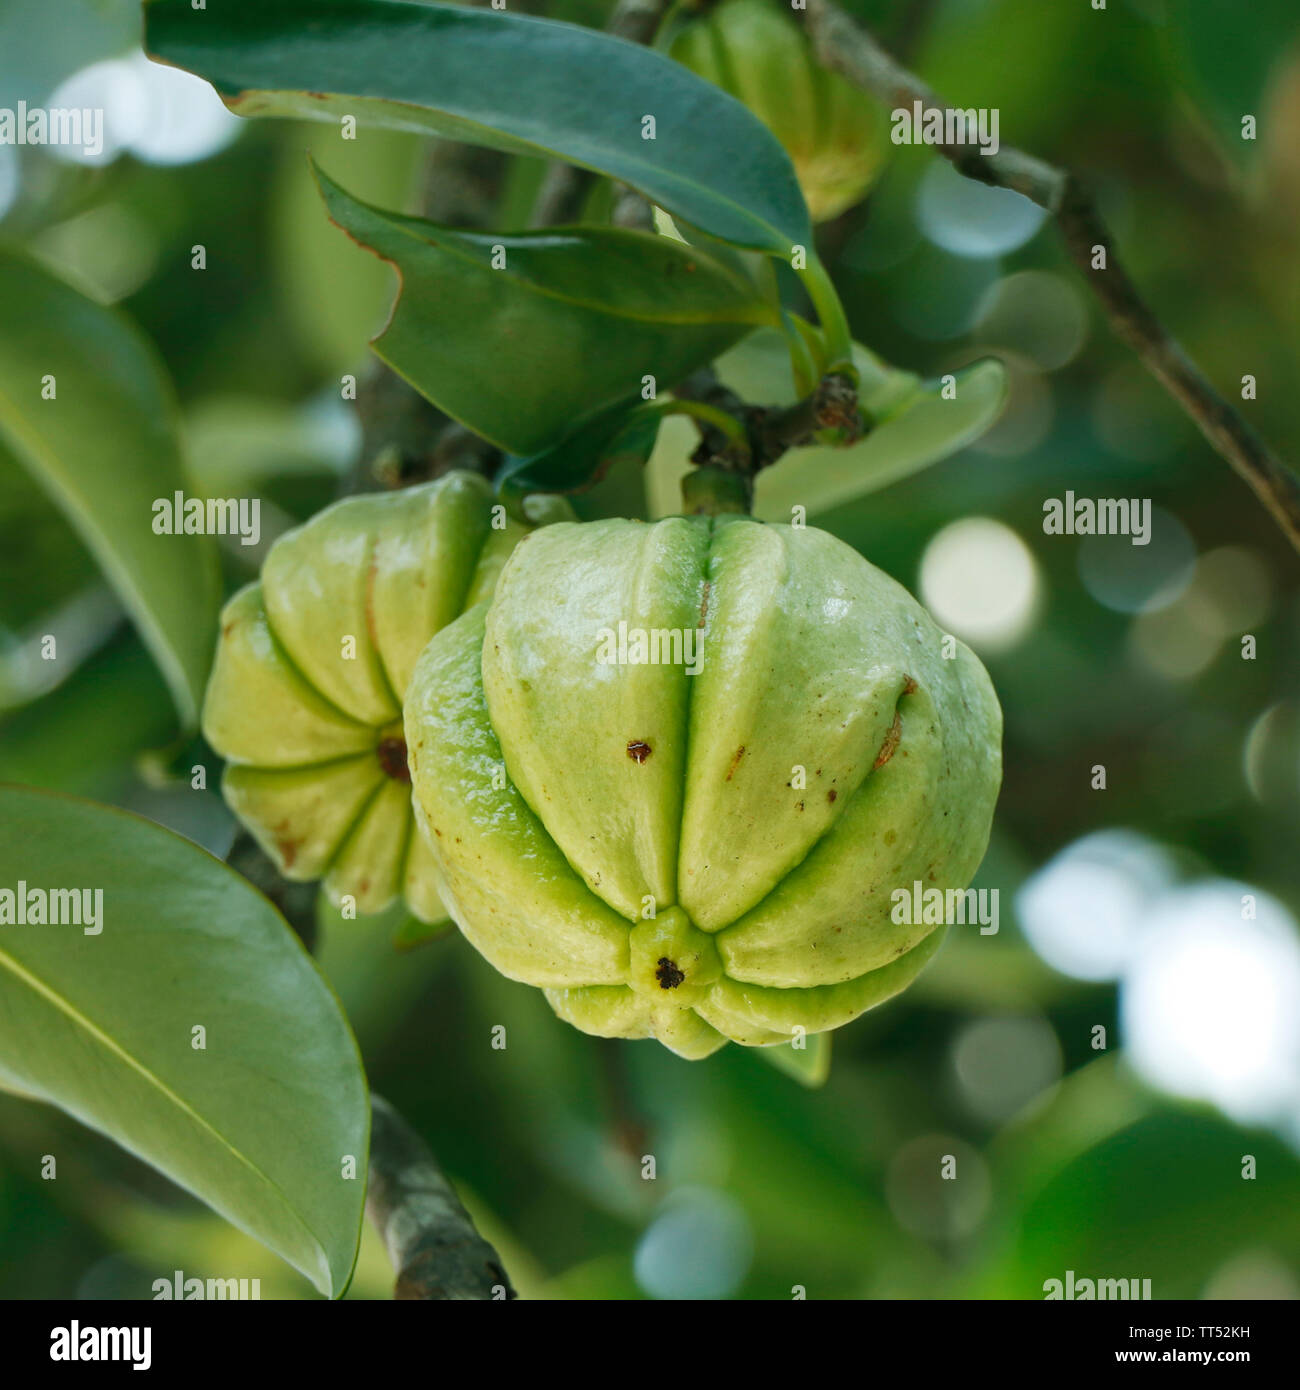 Garcinia gummi-gutta is a tropical species of Garcinia native to Indonesia. Common names include Garcinia cambogia (a former scientific name), as well Stock Photo